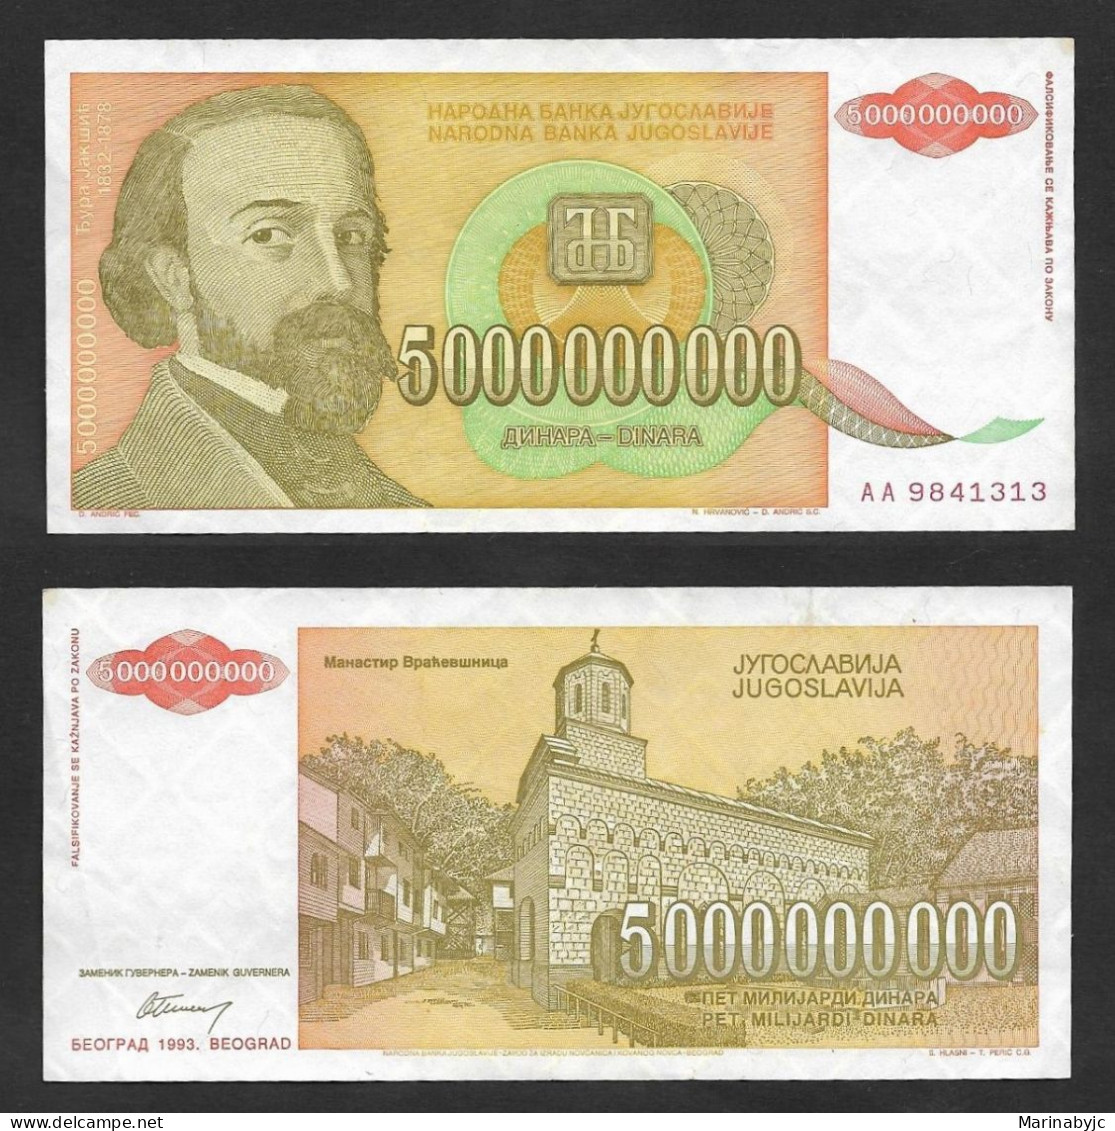 SE)1993 YUGOSLAVIA, BANKNOTE OF 5,00,000,000 DINARS OF THE CENTRAL BANK OF YUGOSLAVIA, WITH REVERSE, VF - Oblitérés